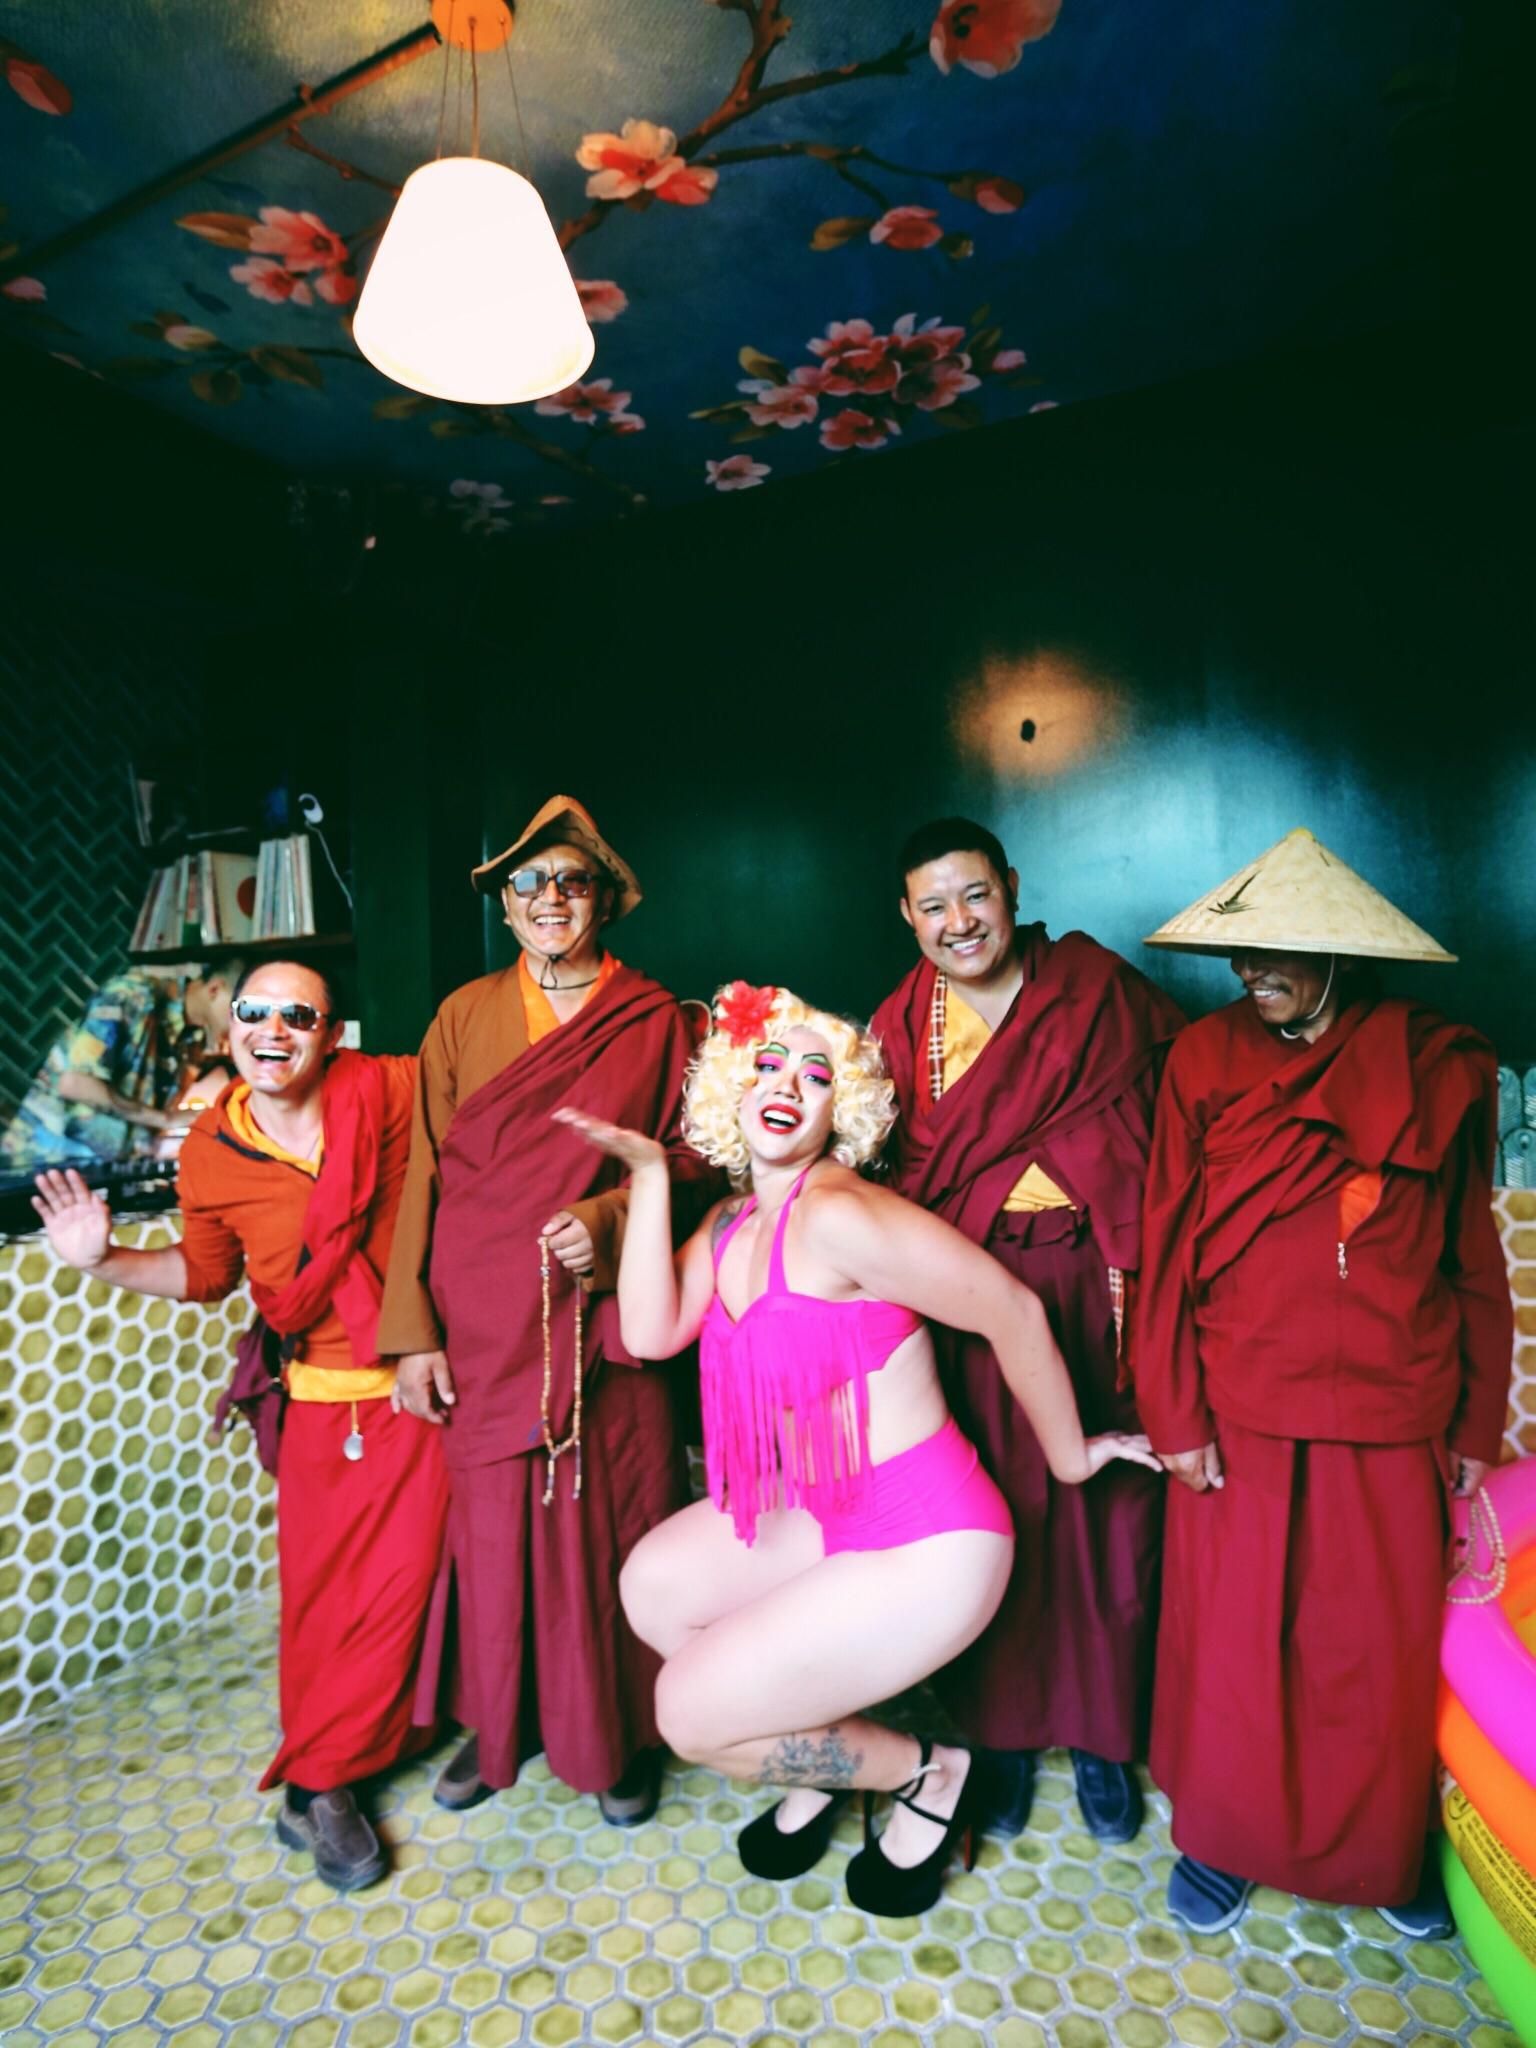 4 random Tibetan monks came into my drag show in Beijing after hearing music and laughter. The rest just happened naturally. The guy on the left is a natural.